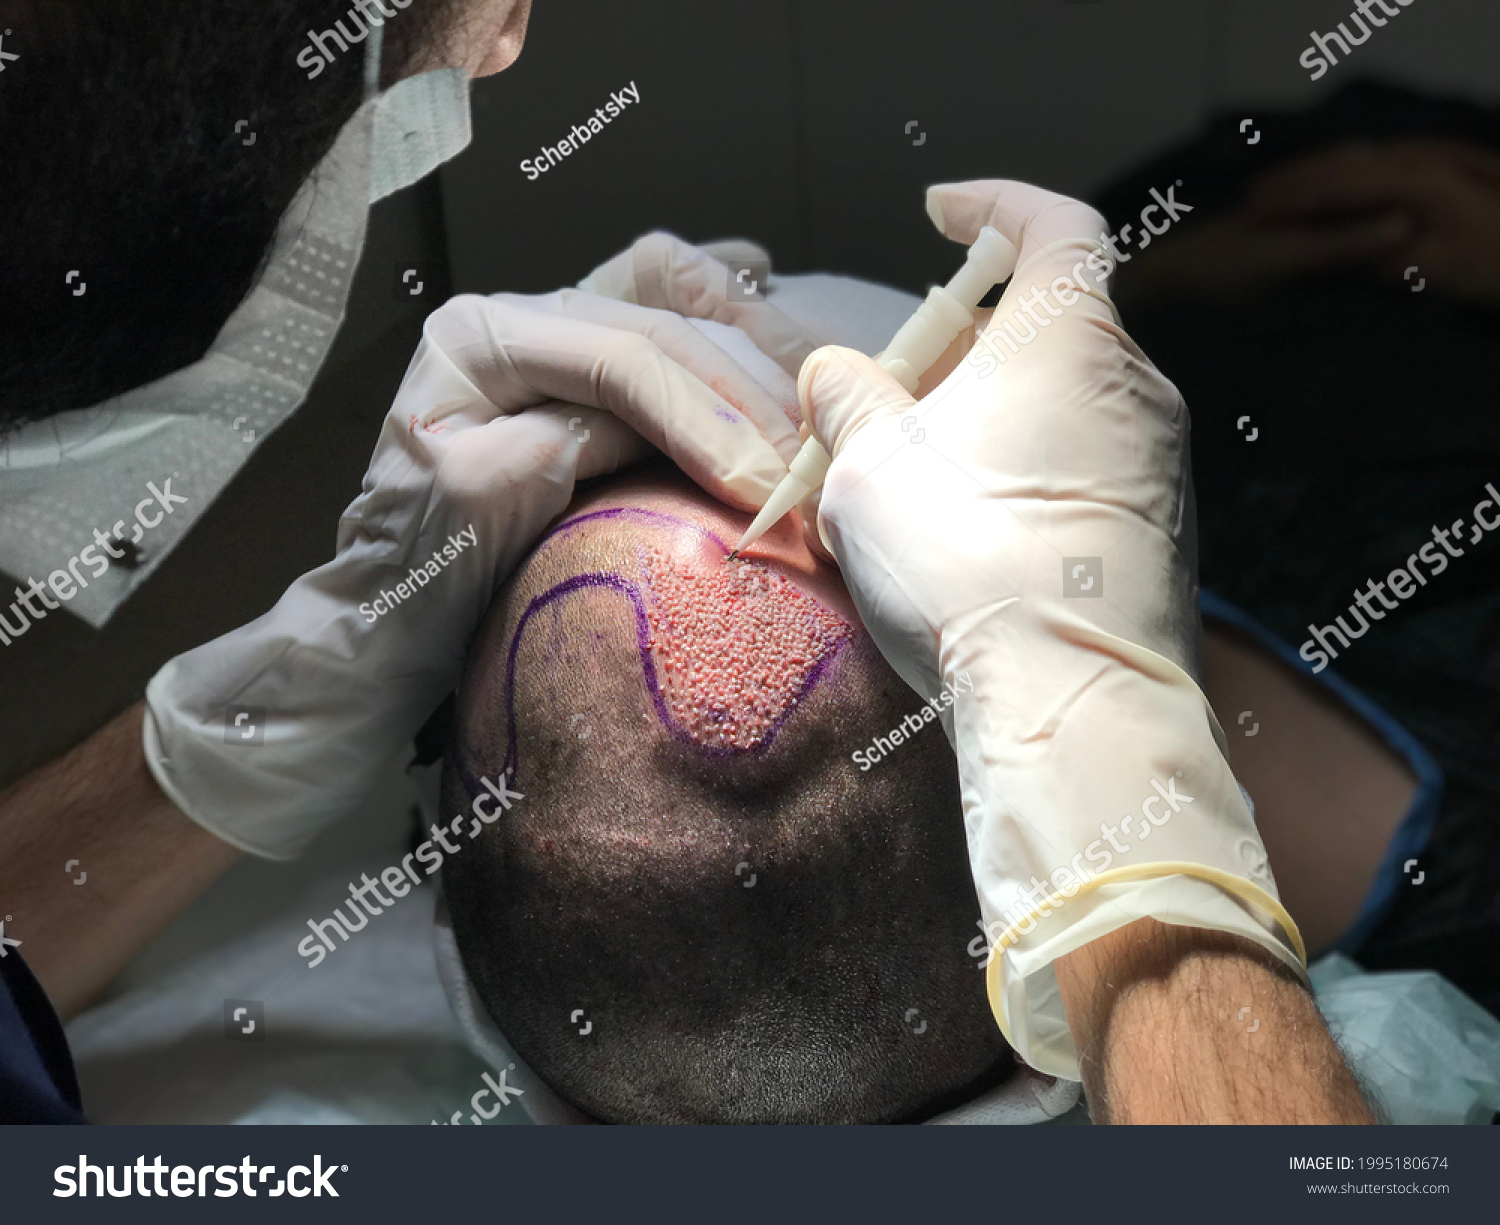 Hair Transplant in Medical Clinic #1995180674